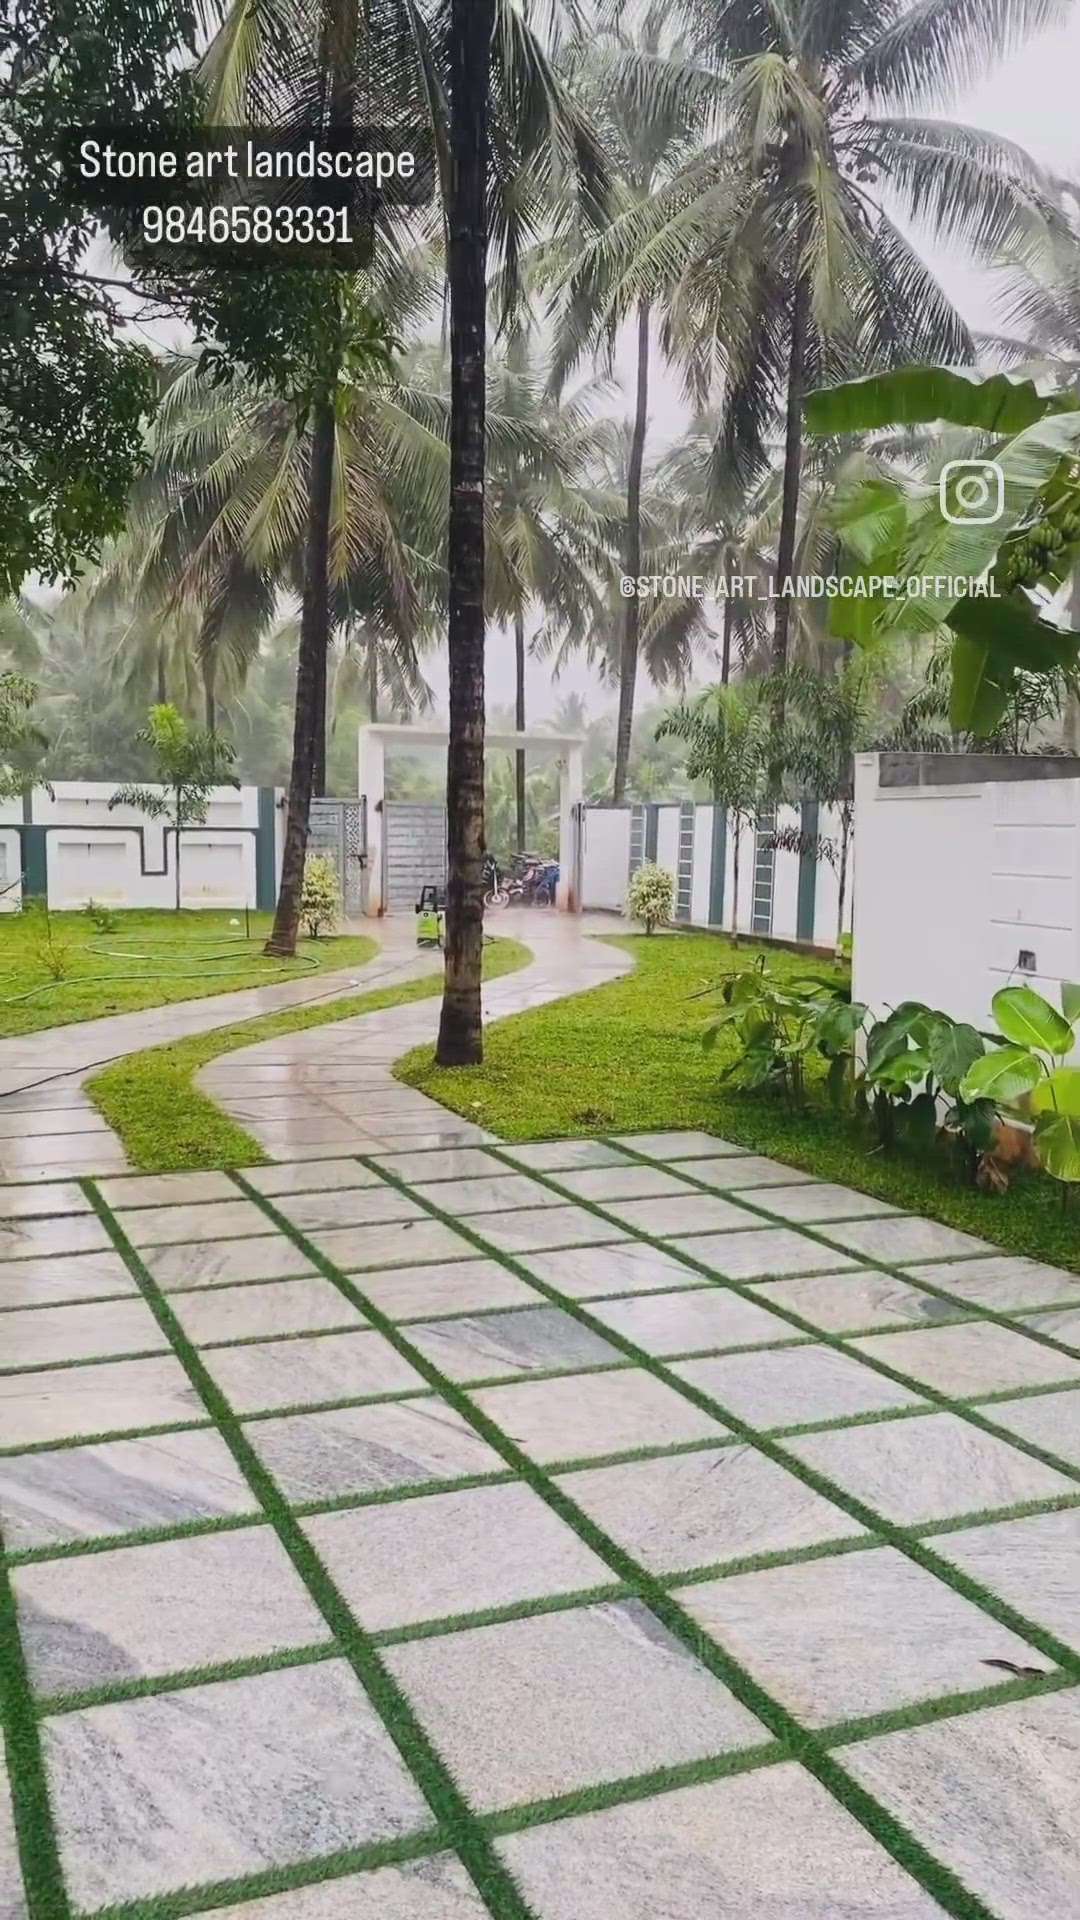 Banglore stone, artificial grass and pearl grass..!

stone art landscape
9846583331
stoneartlandscape. com


 #stoneartlandscape  #naturalstones  #pavingstone  #banglorestones  #artificialgrass  #PearlGrass  #exteriors  #Landscape